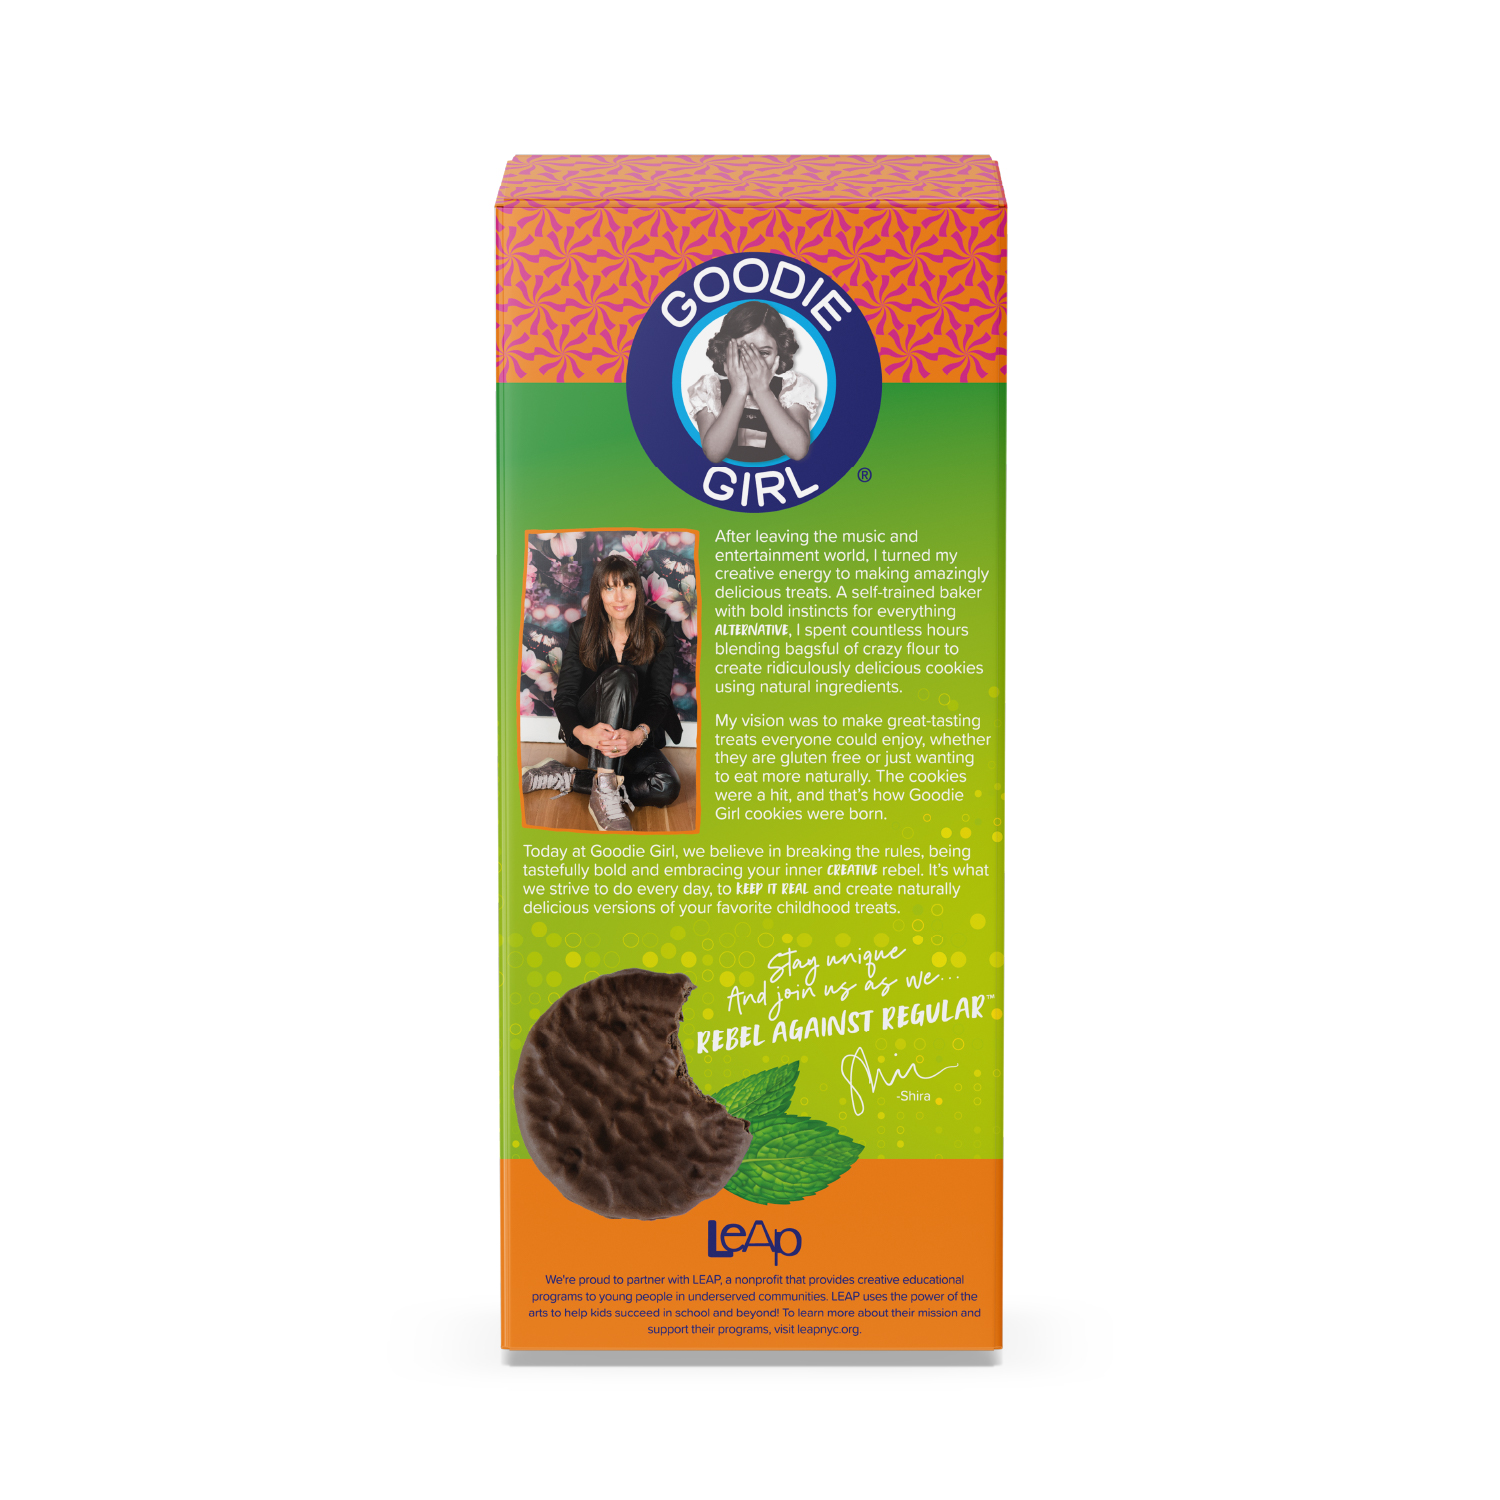 Goodie Girl Mint Cookies, Gluten Free, Shelf Stable, 7 oz Box - image 2 of 10